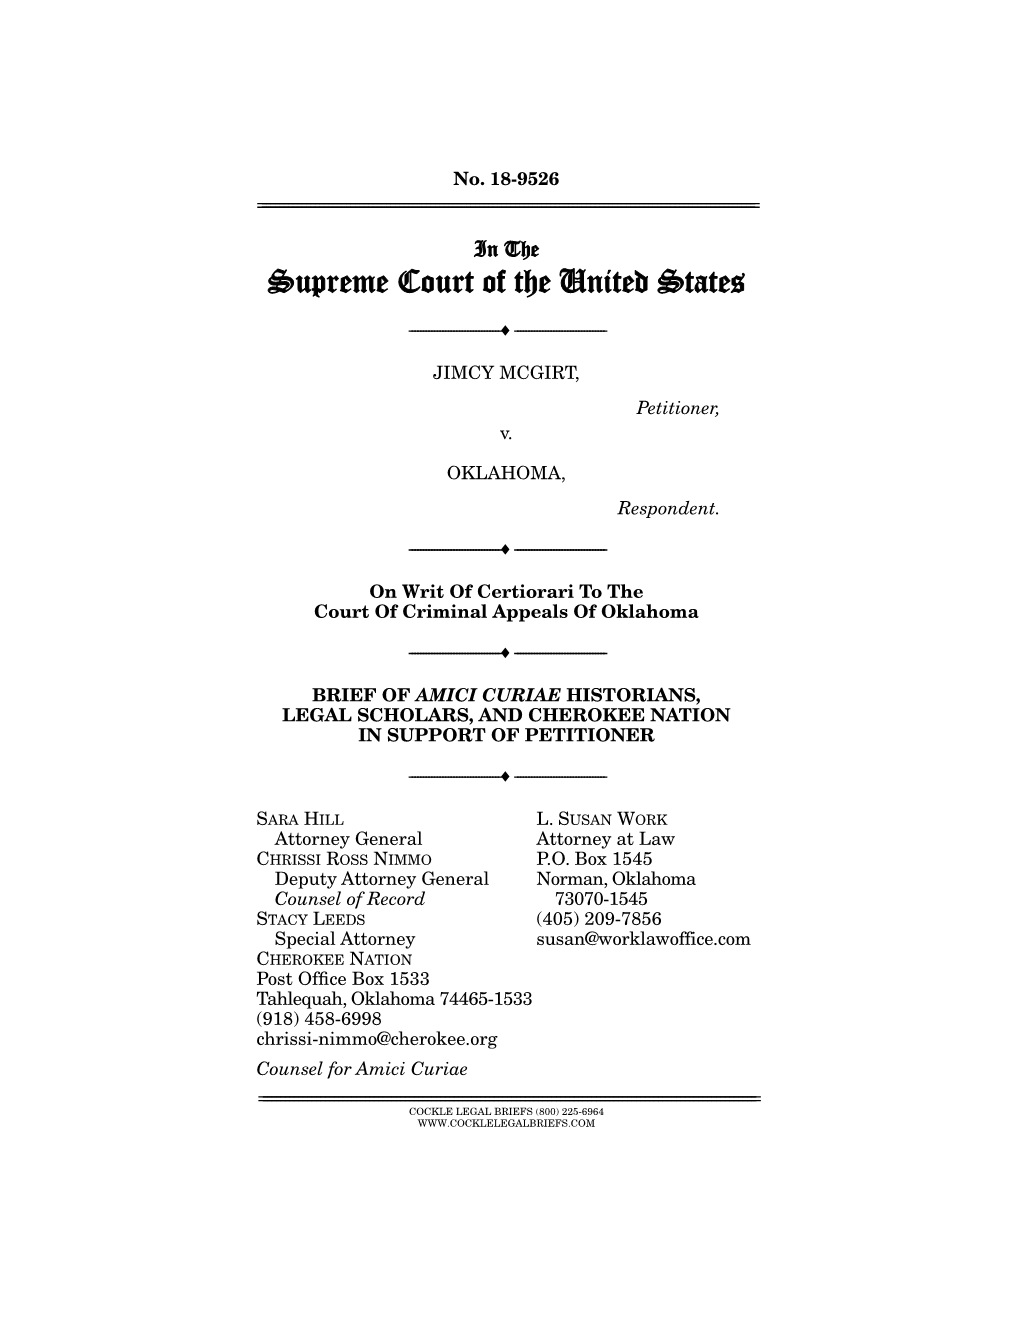 Brief of Amici Curiae Historians, Legal Scholars, and Cherokee Nation in Support of Petitioner